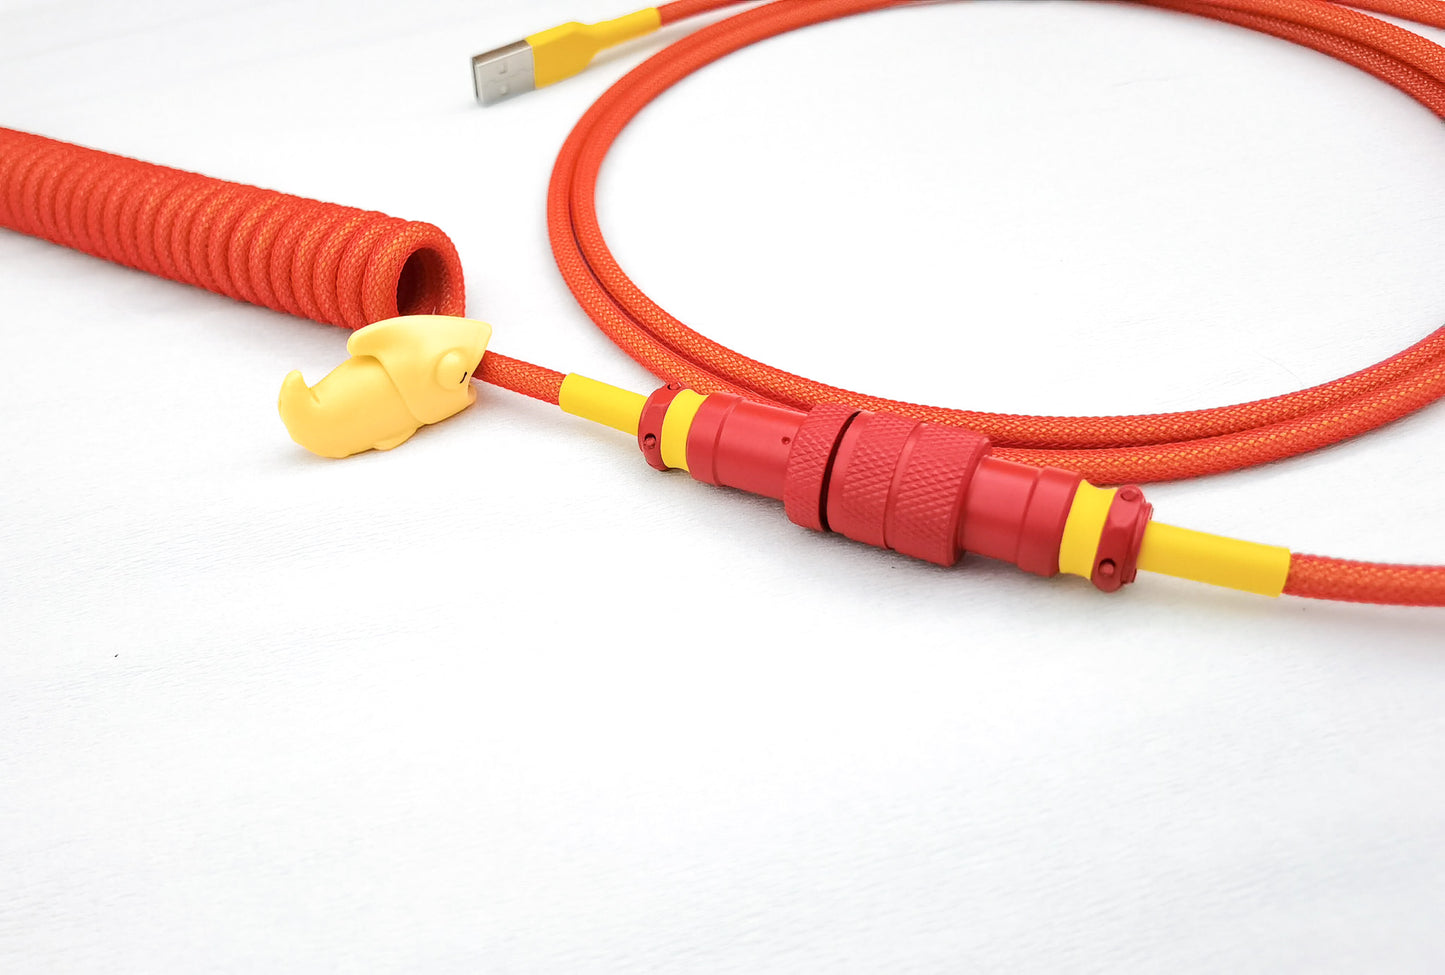 Coiled keyboard cable "Scarlet"